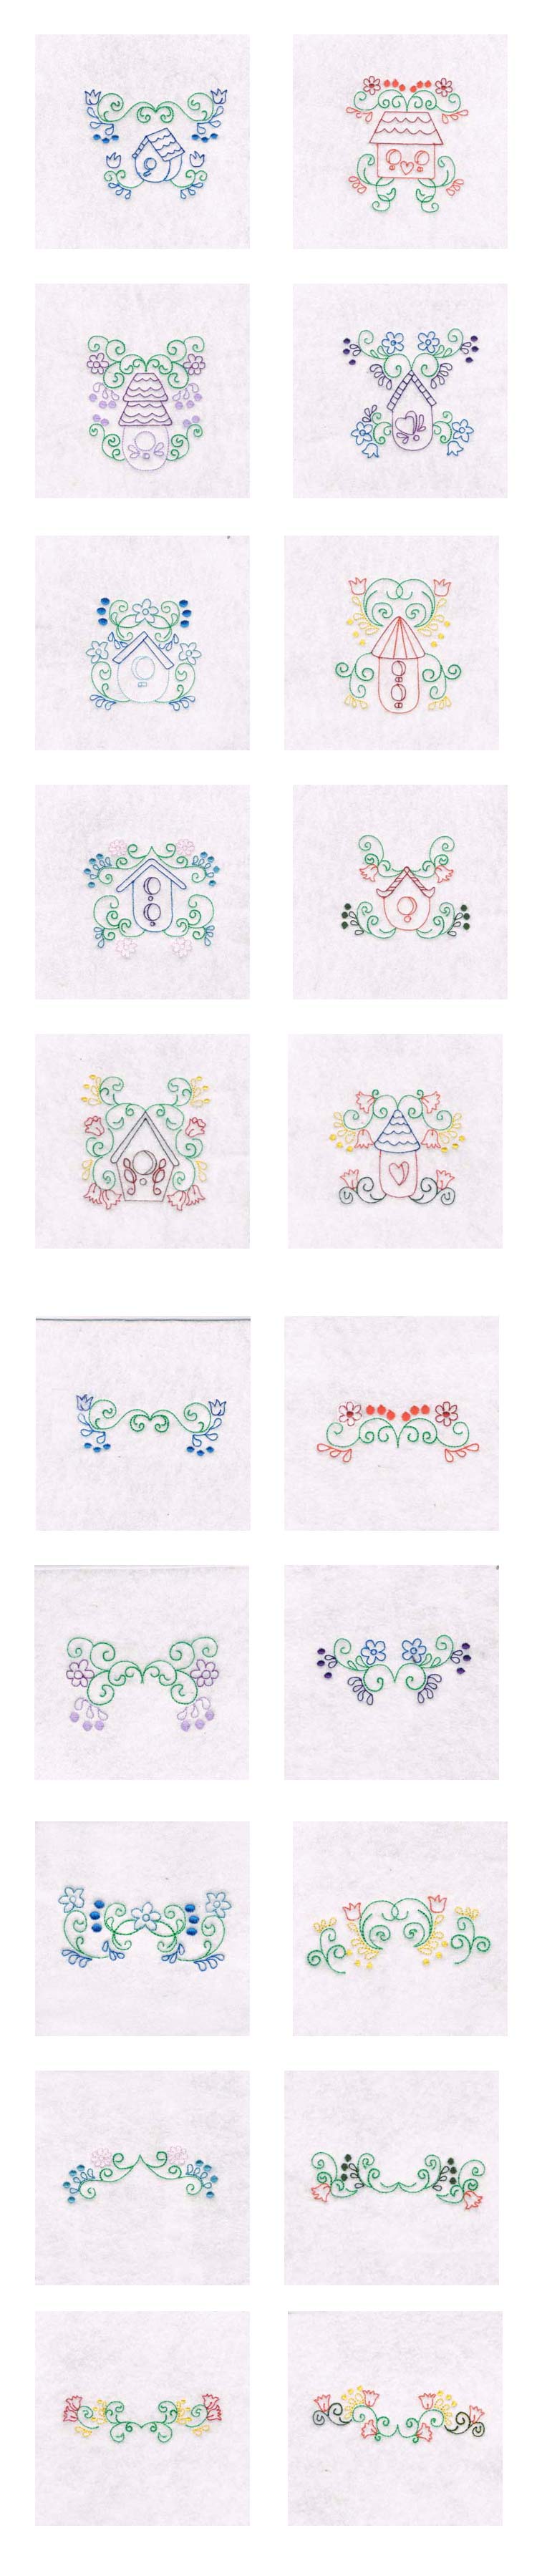 Birdhouses and Borders Embroidery Machine Design Details